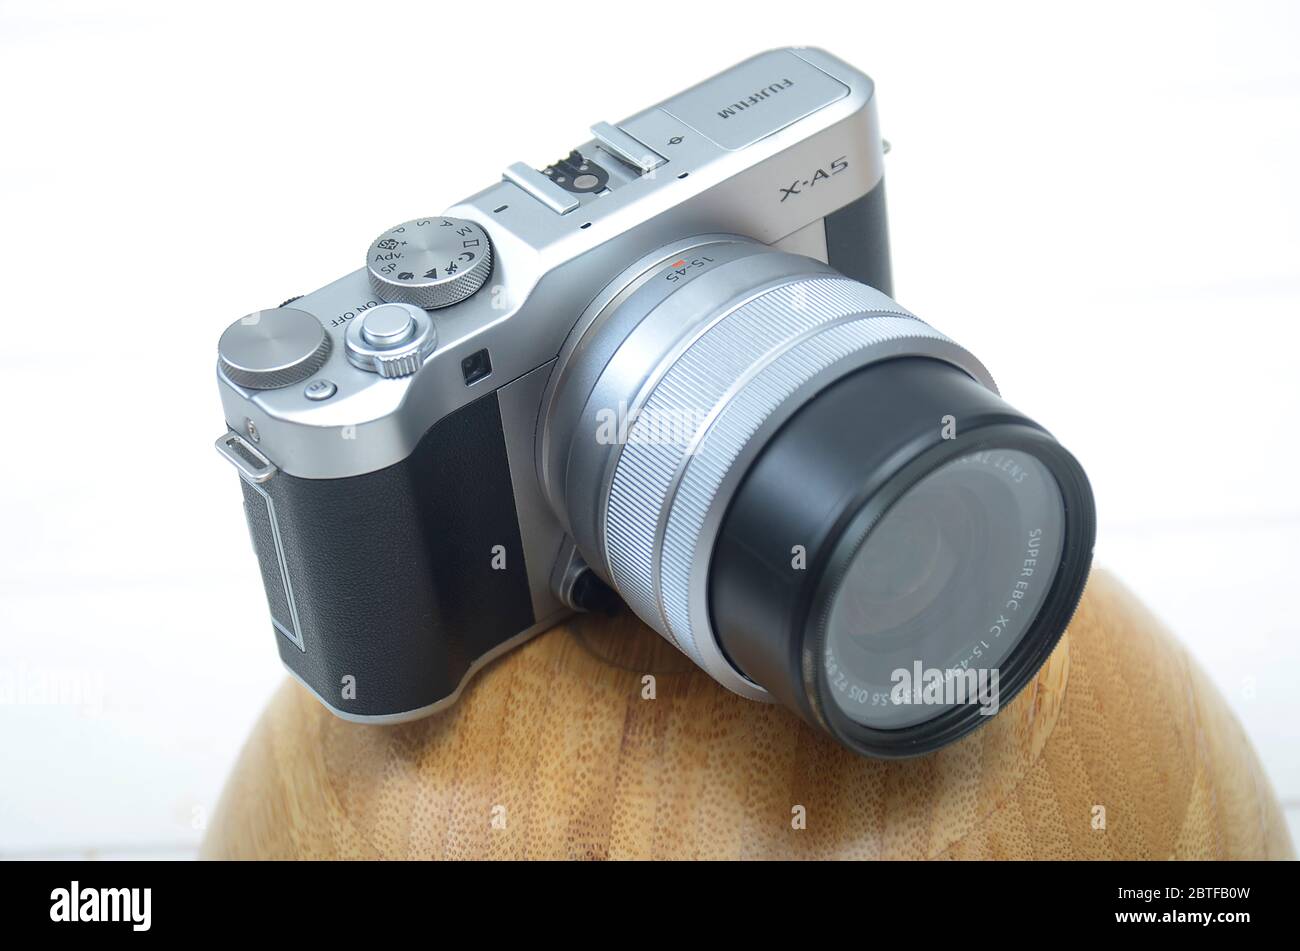 Low entry level, Mirrorless 24 megapixel Camera fujifilm X-A5, mirrorless is a generation digital camera using electronic view finder, with out prism Stock Photo